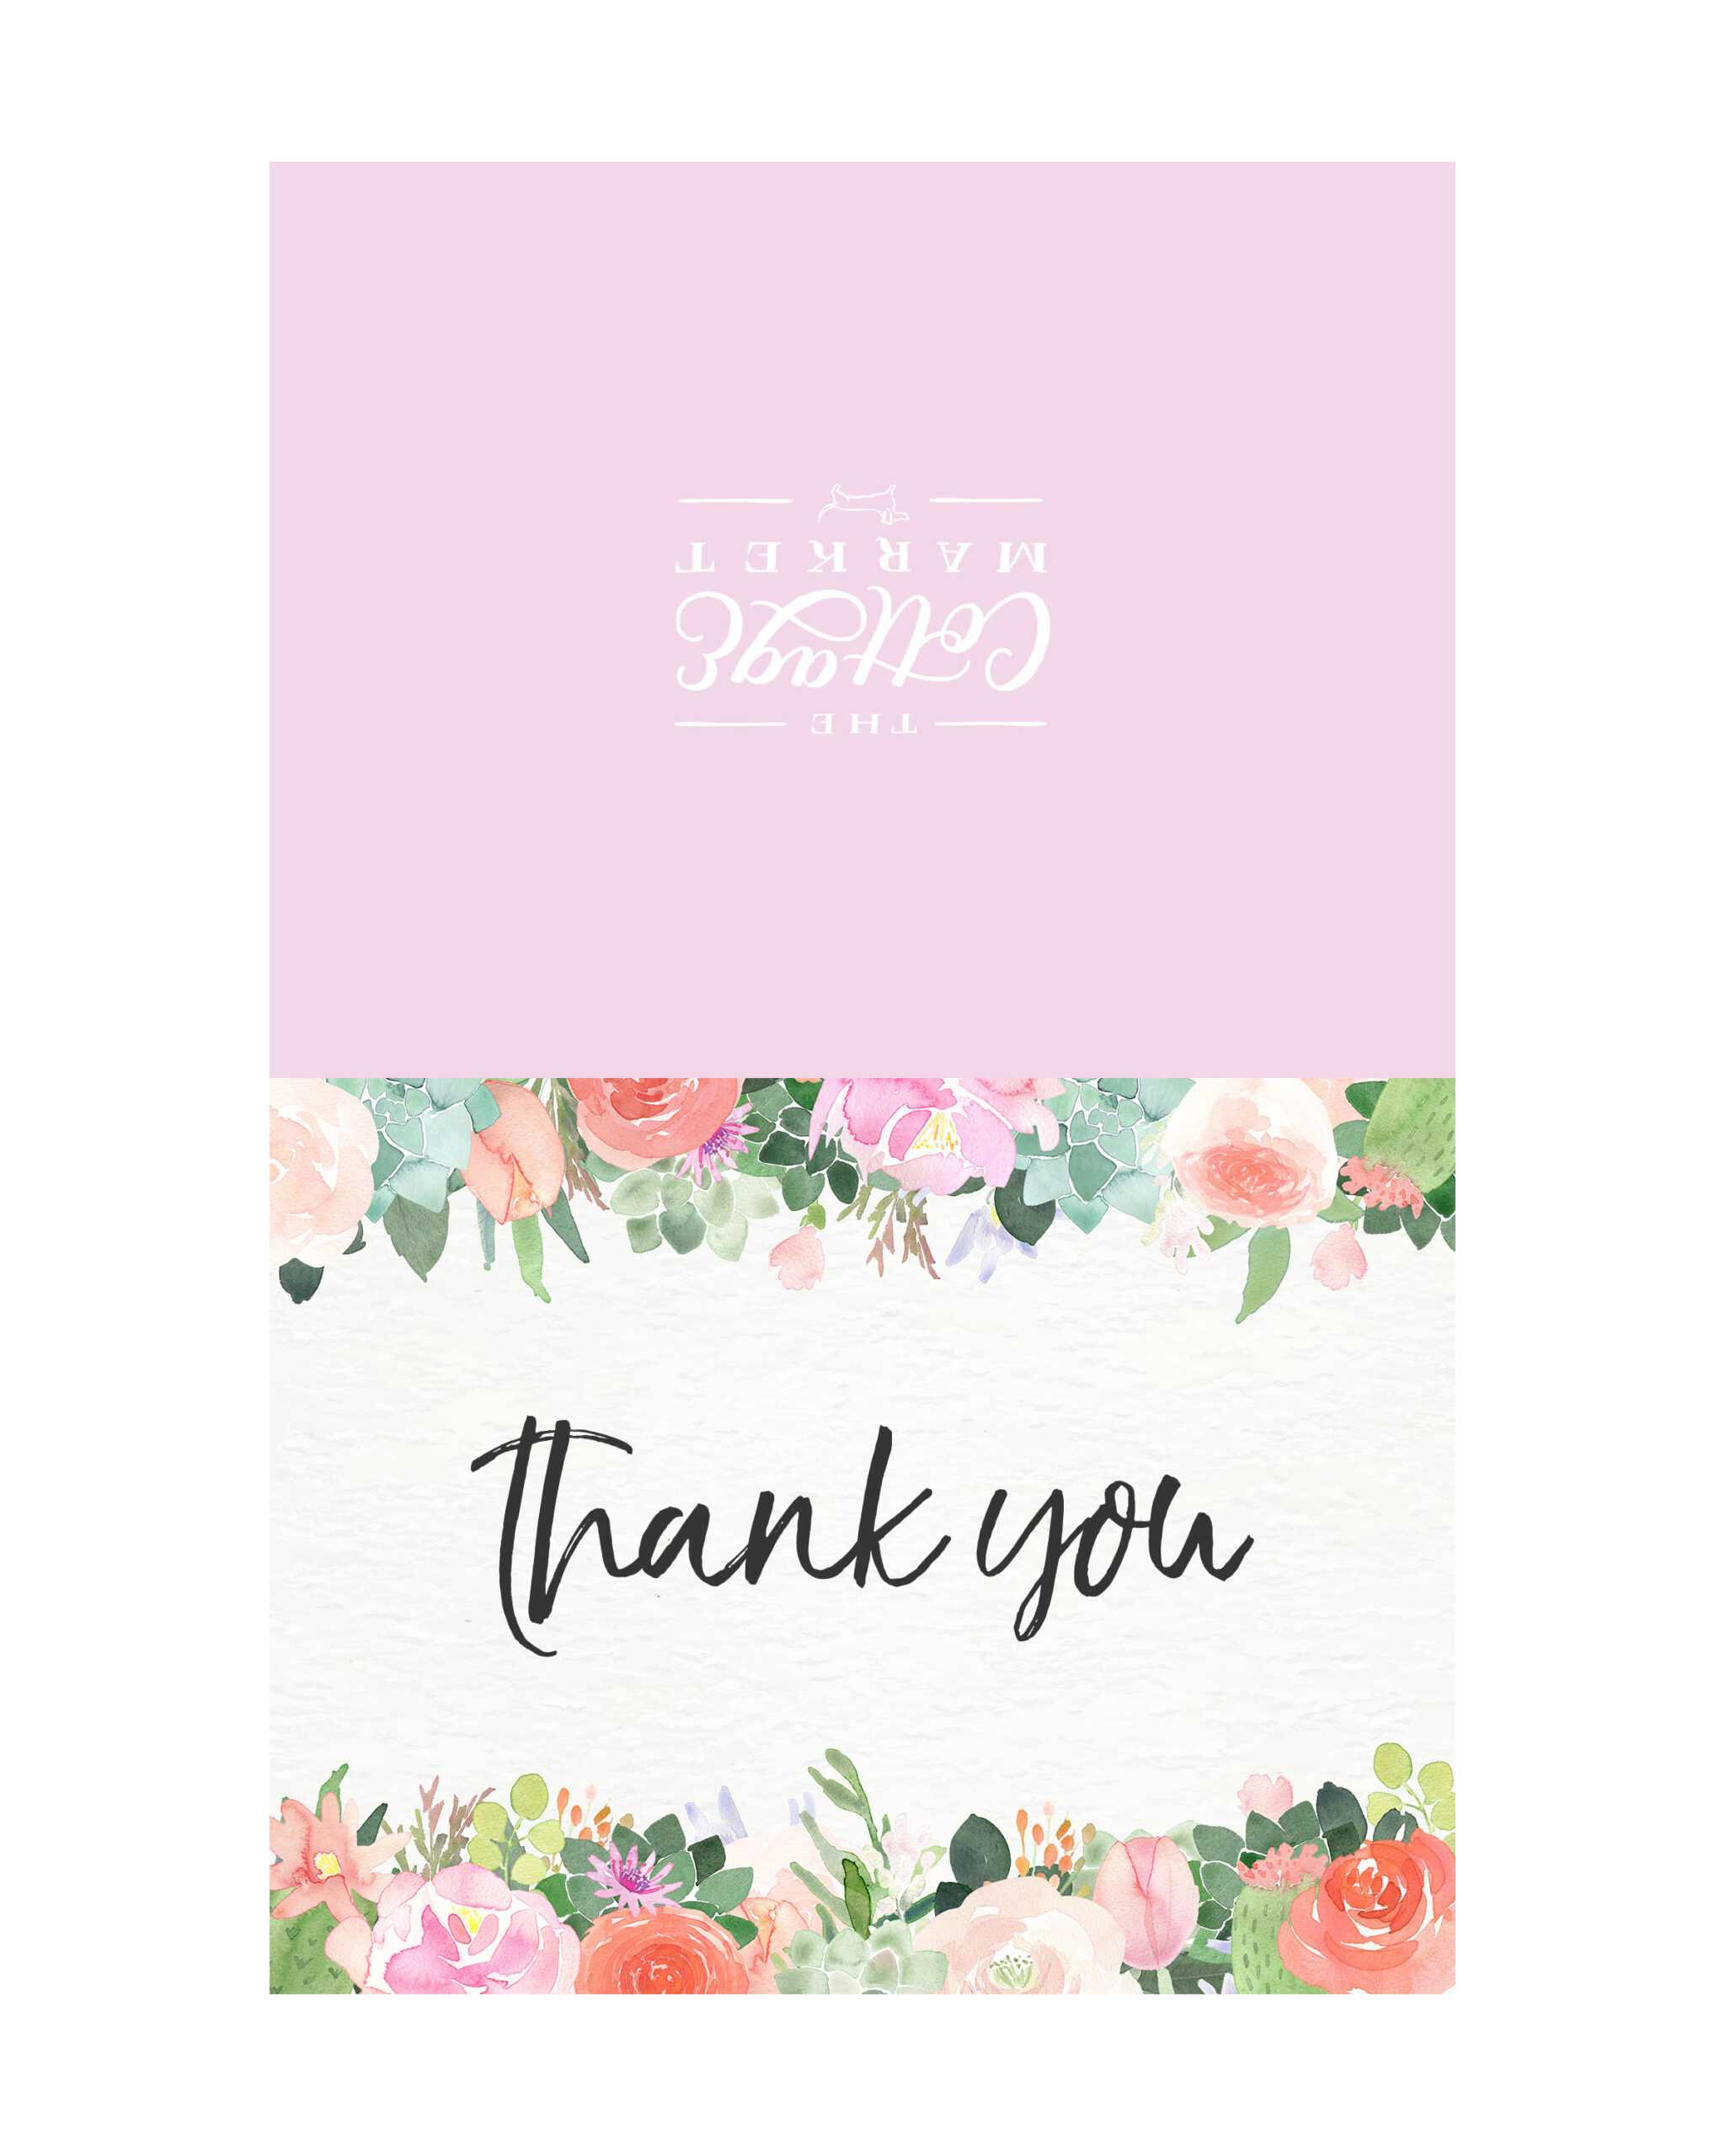 10 Free Printable Thank You Cards You Can't Miss - The For Free Printable Thank You Card Template